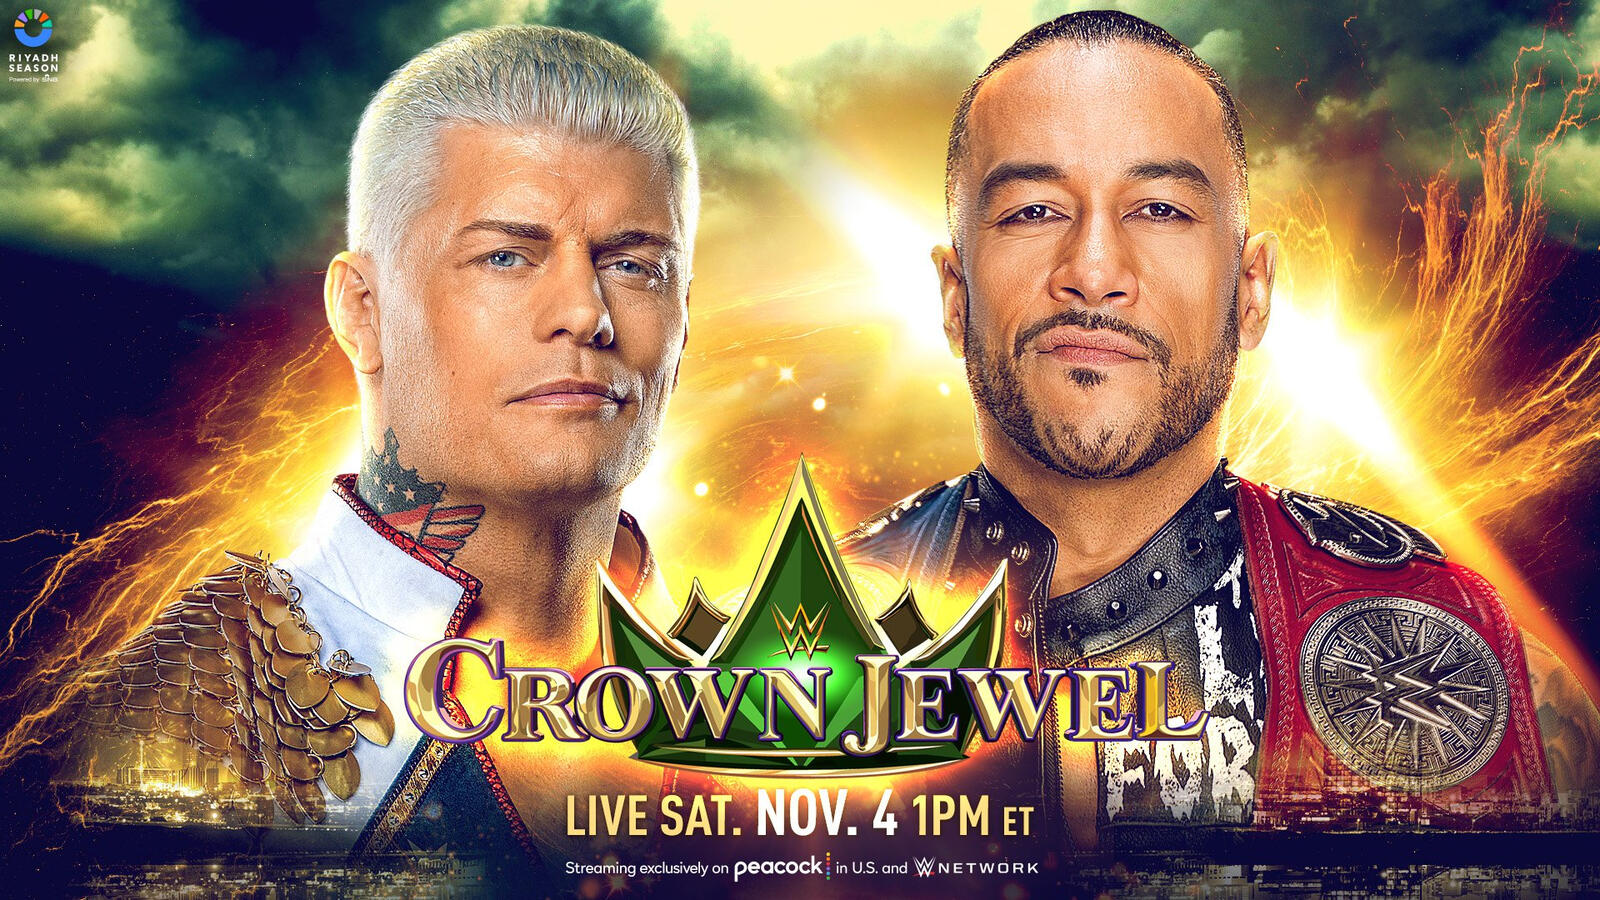 Cody Rhodes Vs Damian Priest Announced For WWE Crown Jewel